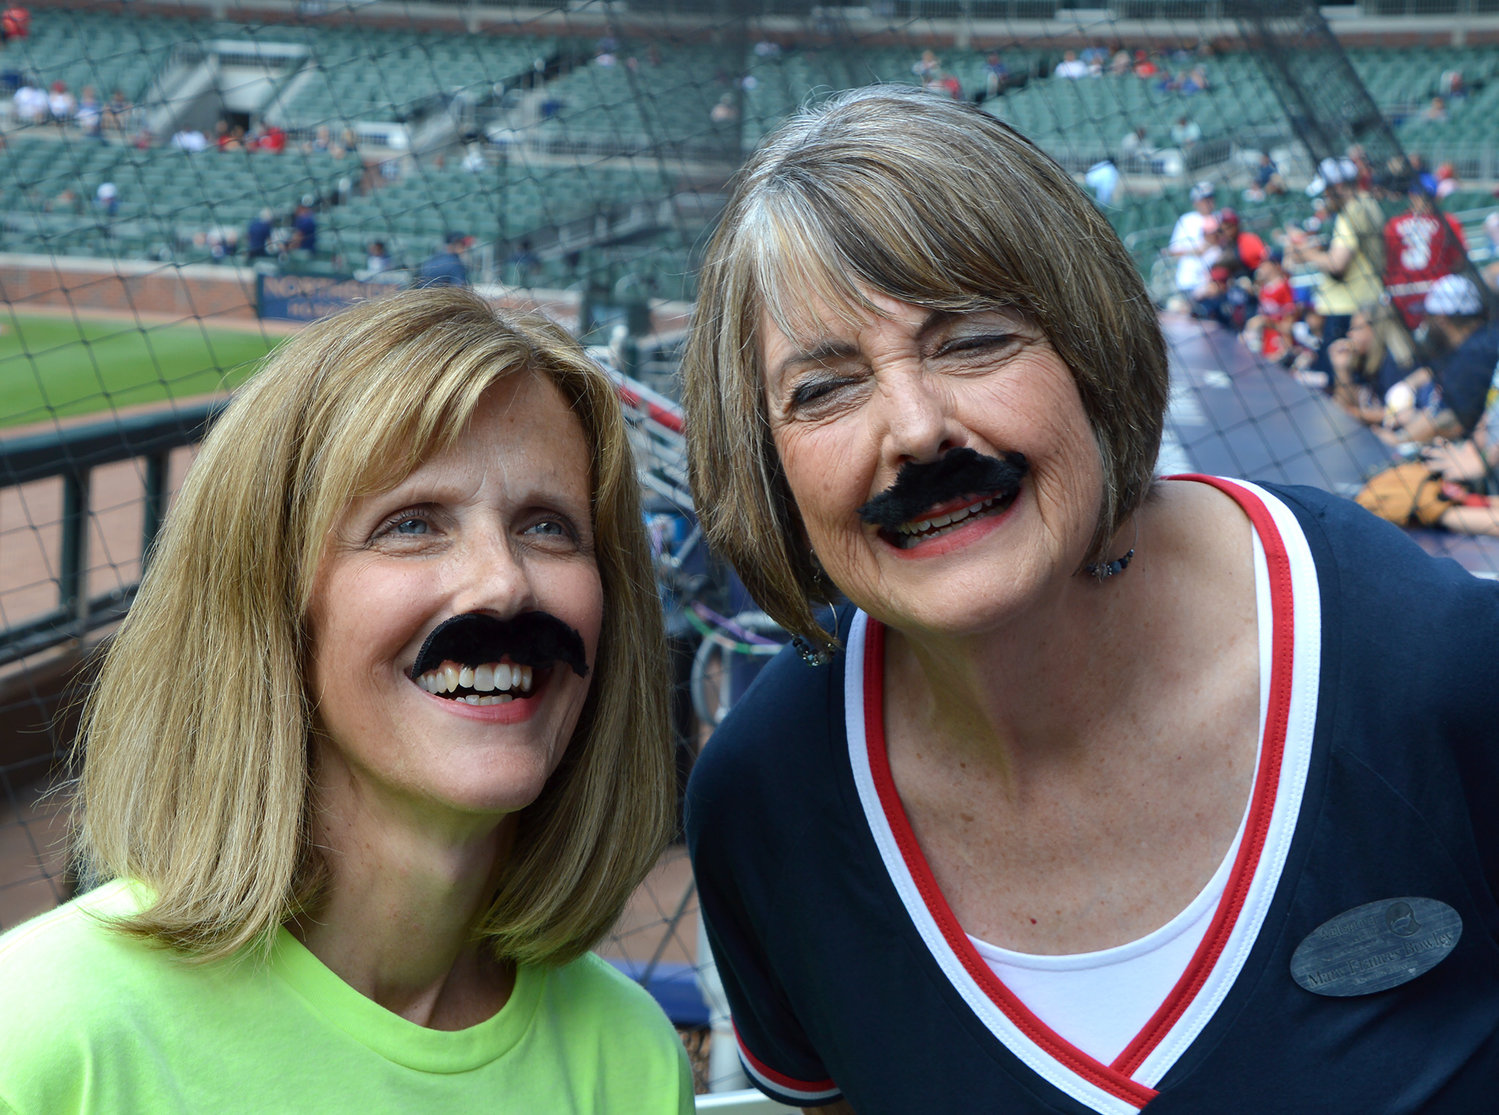 Georgia Baptist Mission Board strategist Beth Ann Williams and Mary Frances Bowley, right, executive director of Wellspring Living, wear mustaches in honor of Atlanta Braves starting pitcher Spencer Strider, prior to the Braves game Sunday, Sept. 18, 2022, in Atlanta. Representatives from Mission Georgia were at the game to promote Wellspring Living, which provides housing to survivors of human trafficking, prior to the Atlanta Braves game Sunday, Sept. 18, 2022, in Atlanta. (Christian Index/Henry Durand)